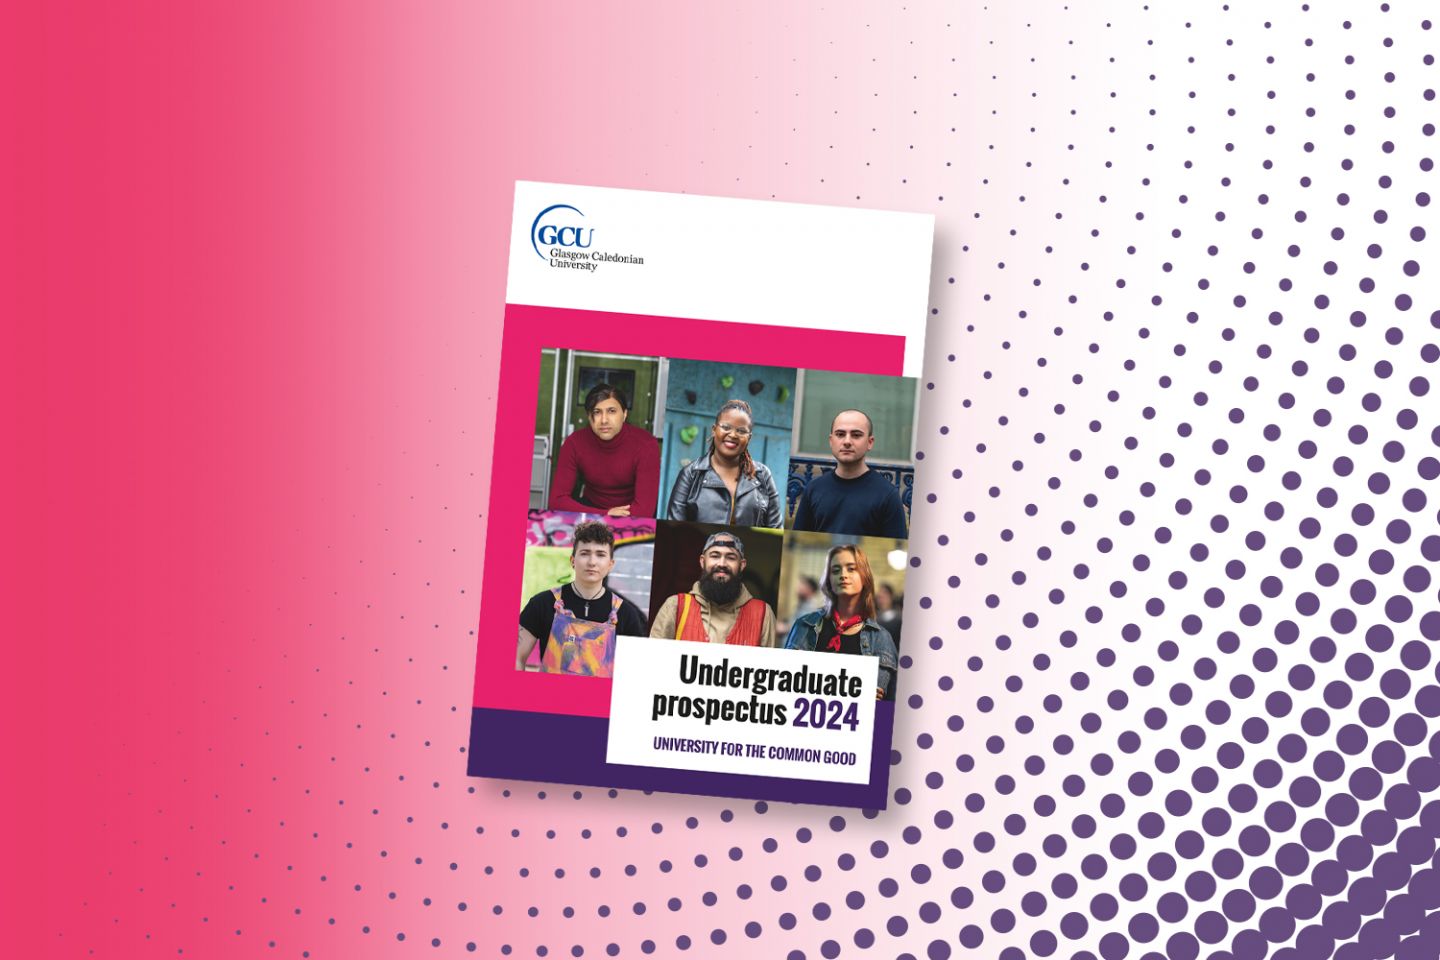 Graphic showing the undergraduate prospectus front cover and that it is available for downloading